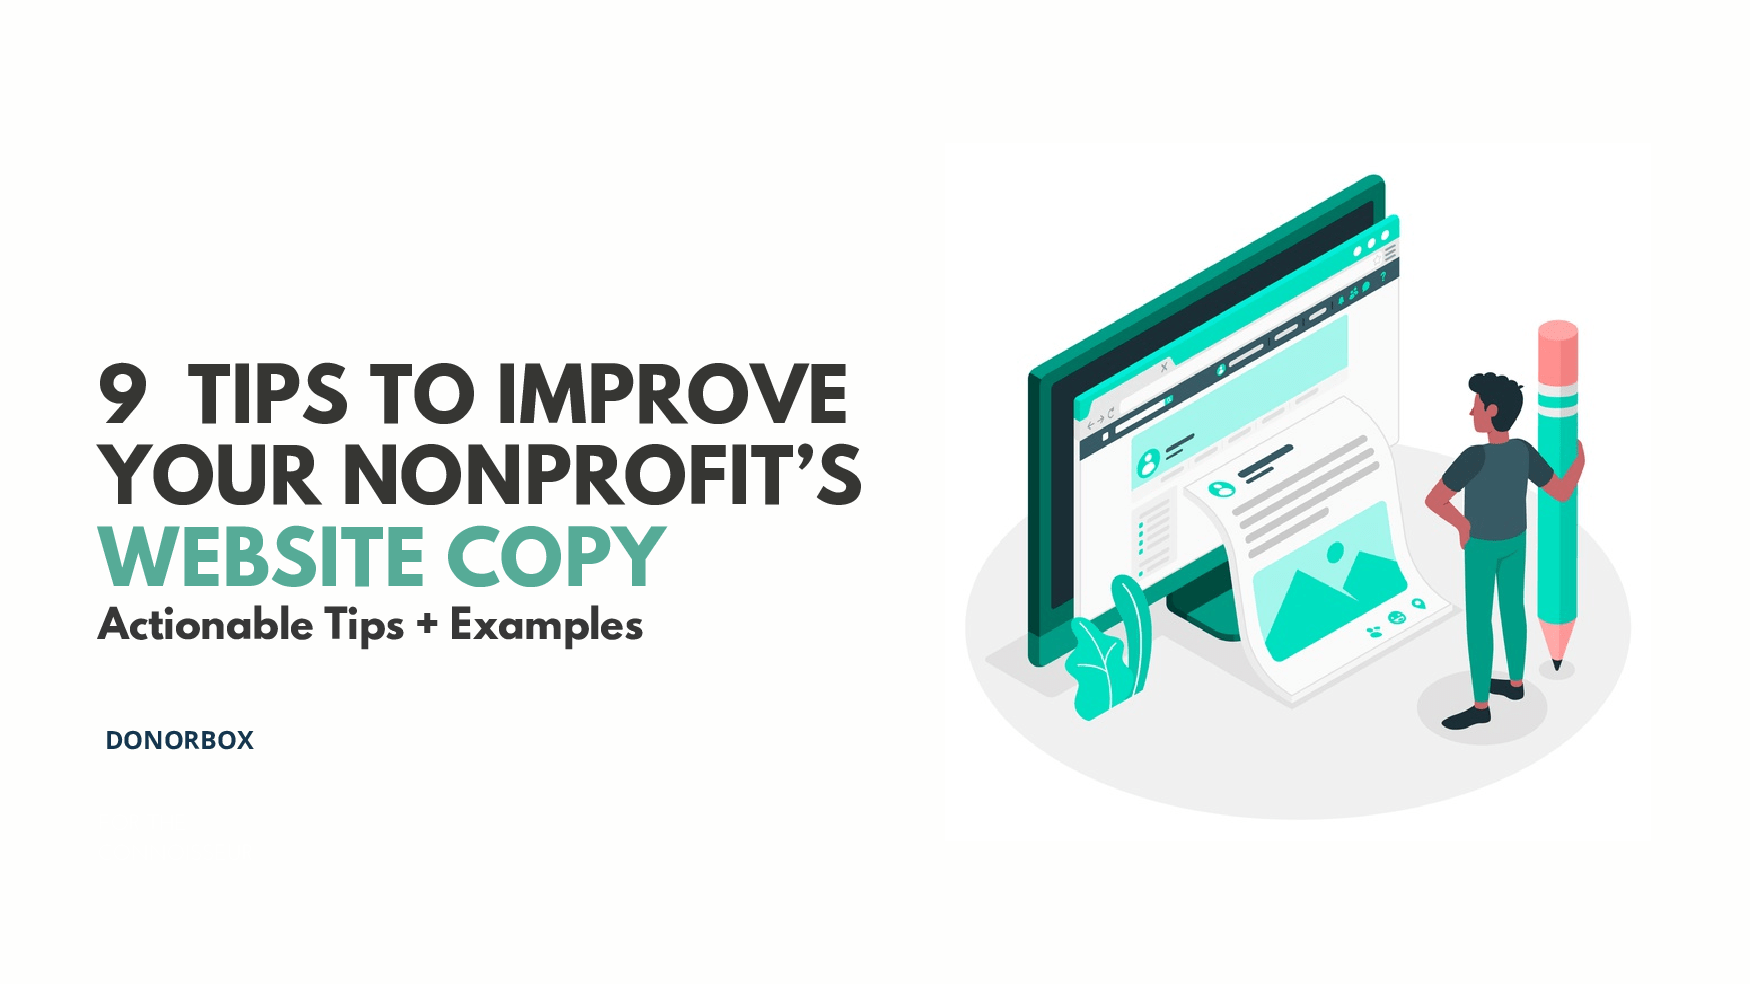 9 Actionable Tips to Improve Your Nonprofit’s Website Copy (+30 Examples)